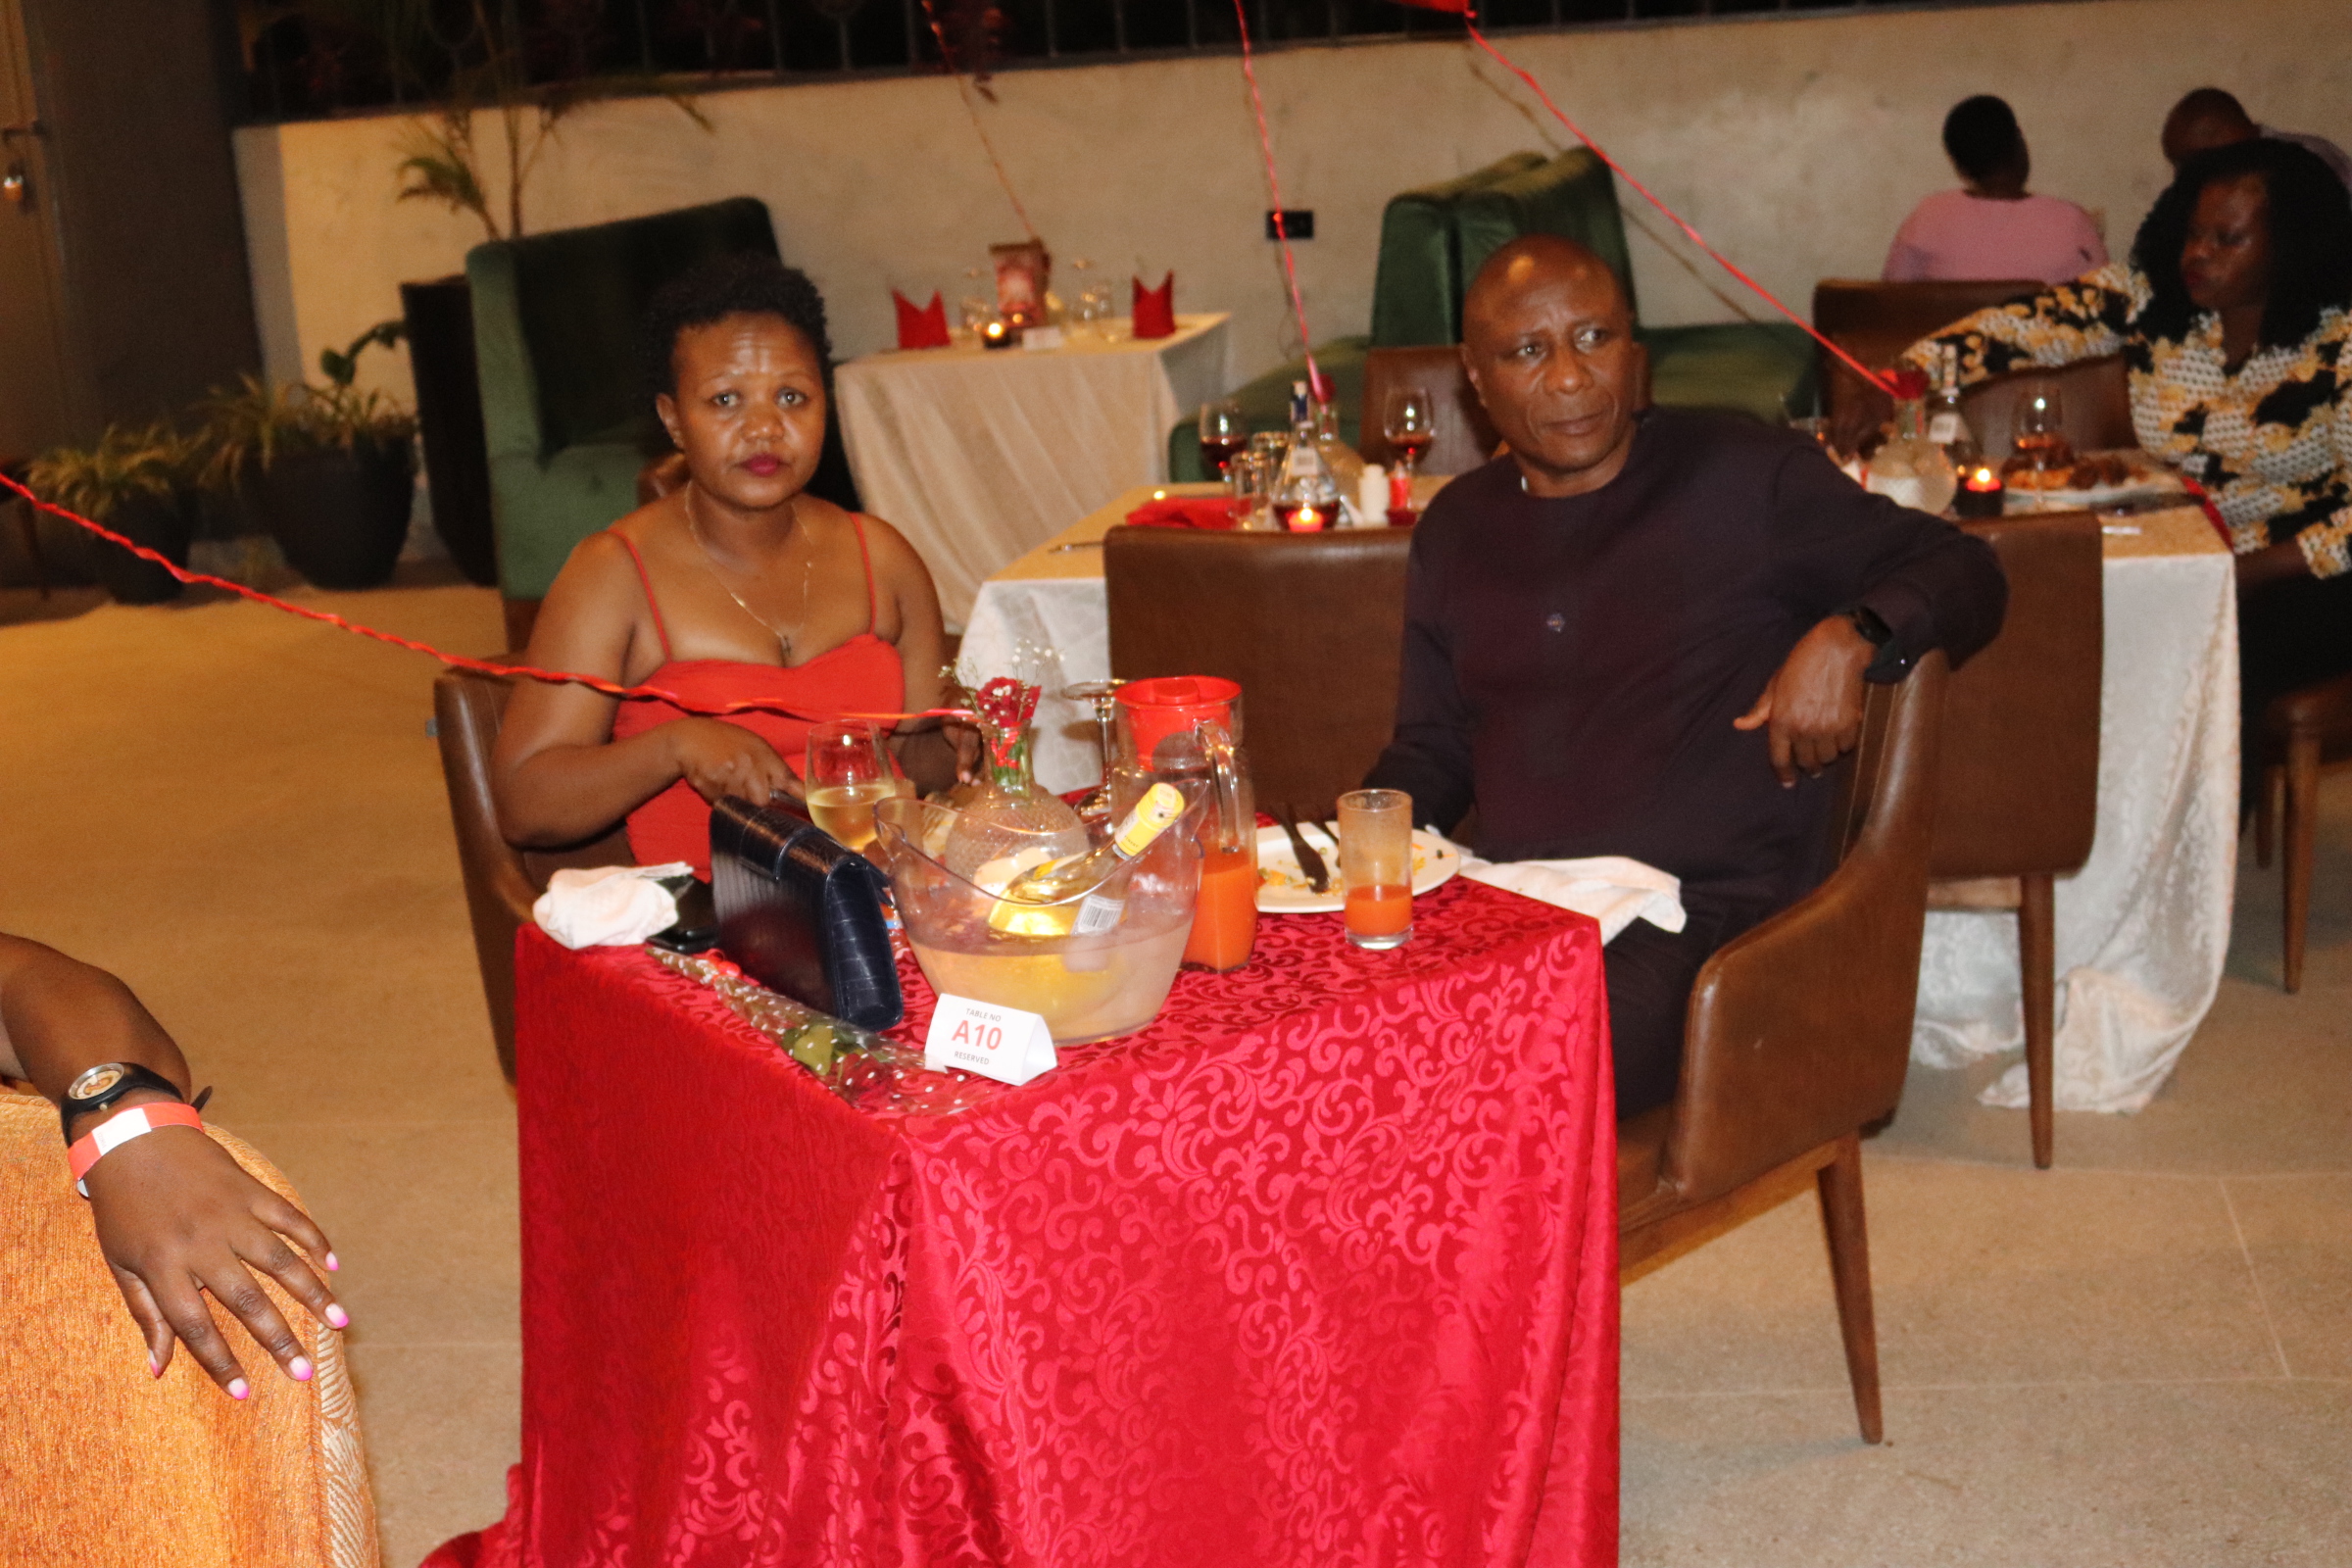 Valentines Day: ICT Minister Kabyanga,The Love Champion! Here’s What You Missed At Fairway Hotel